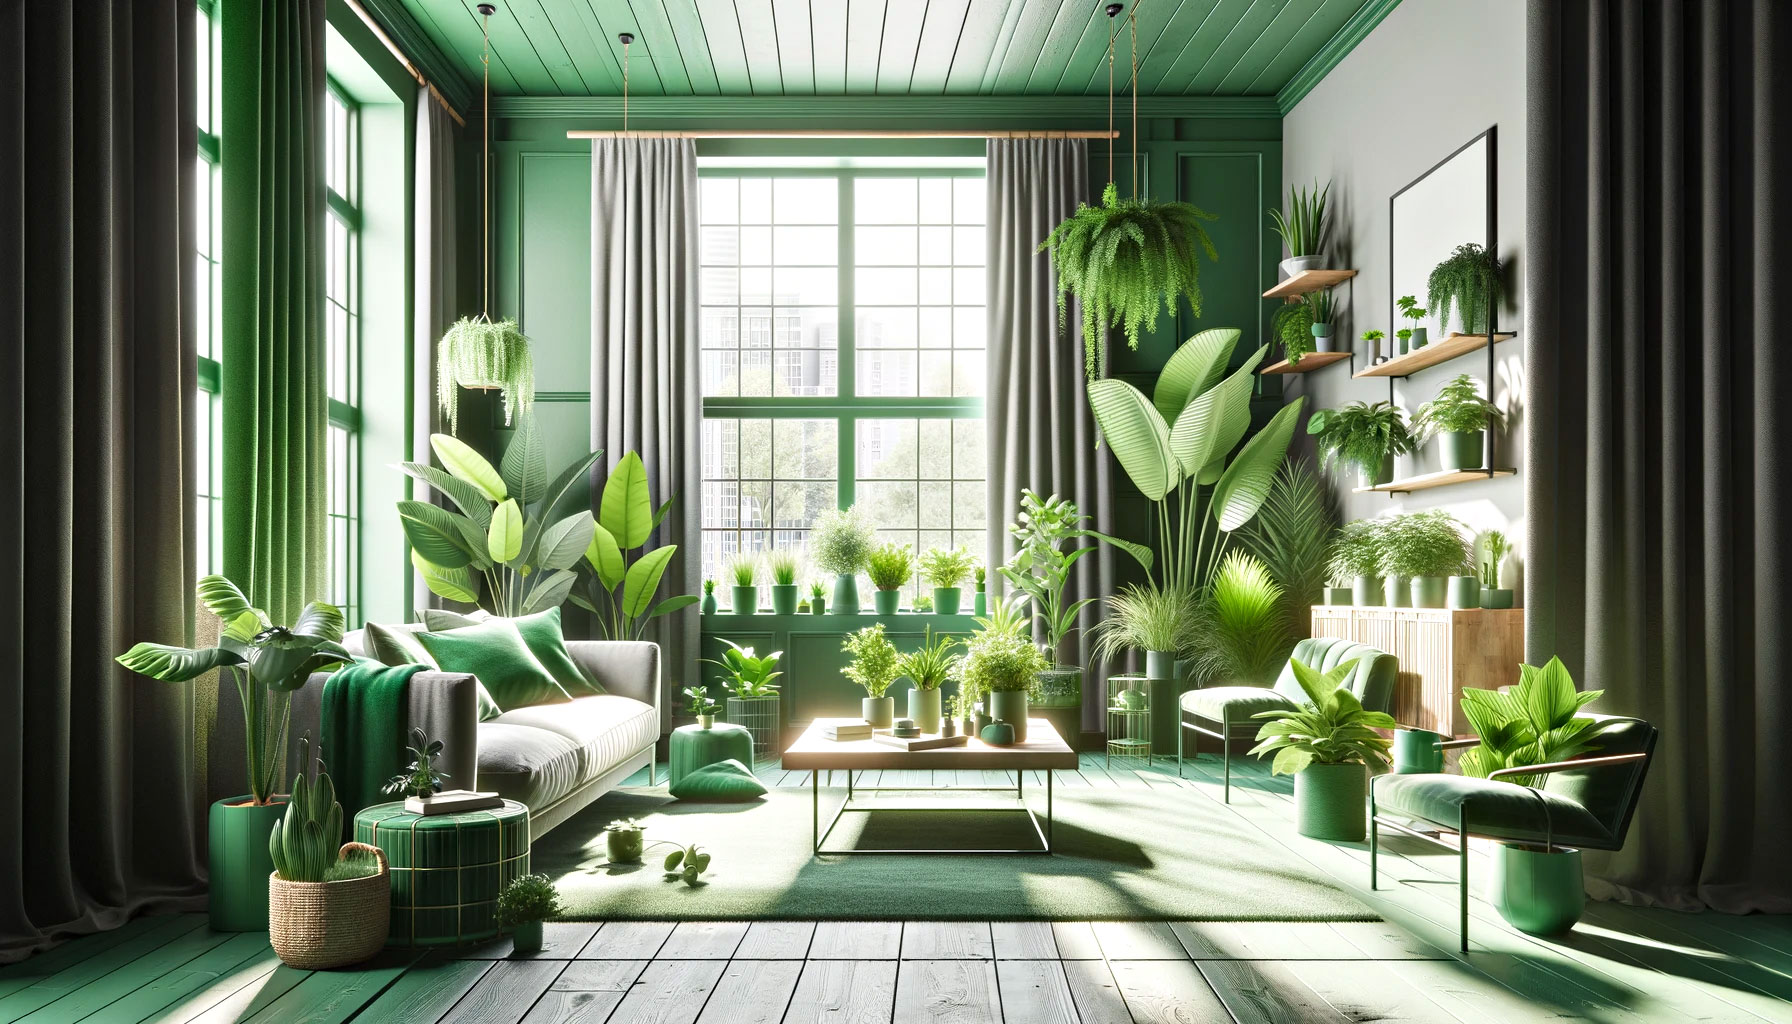 The Colour Psychology of Green in Interior Design